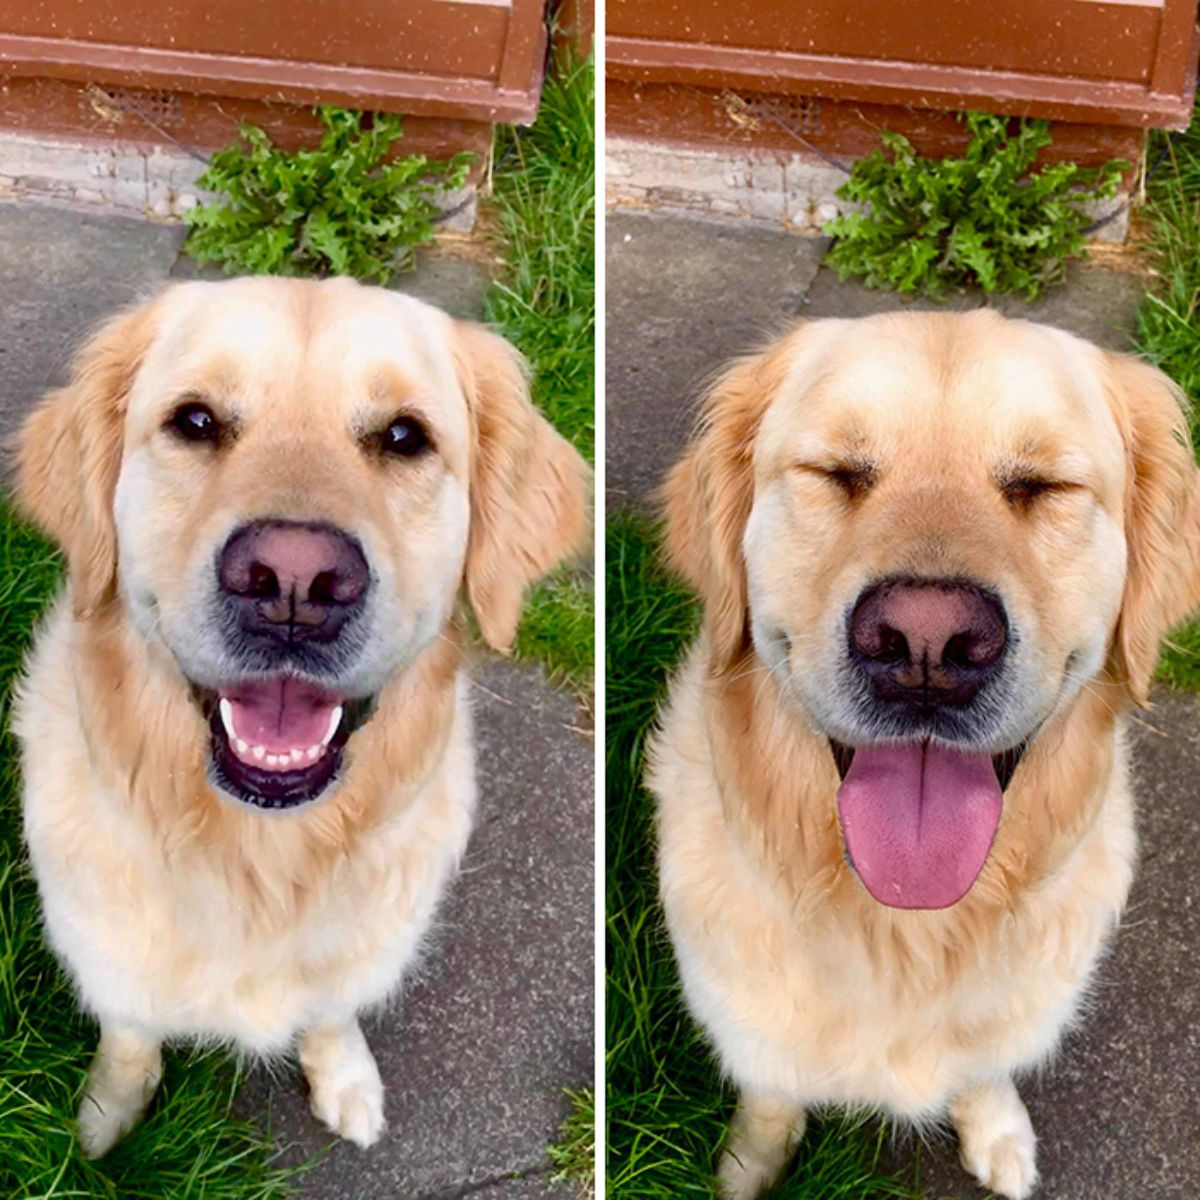 2 photos of a golden retriever sitting on the ground and smiling